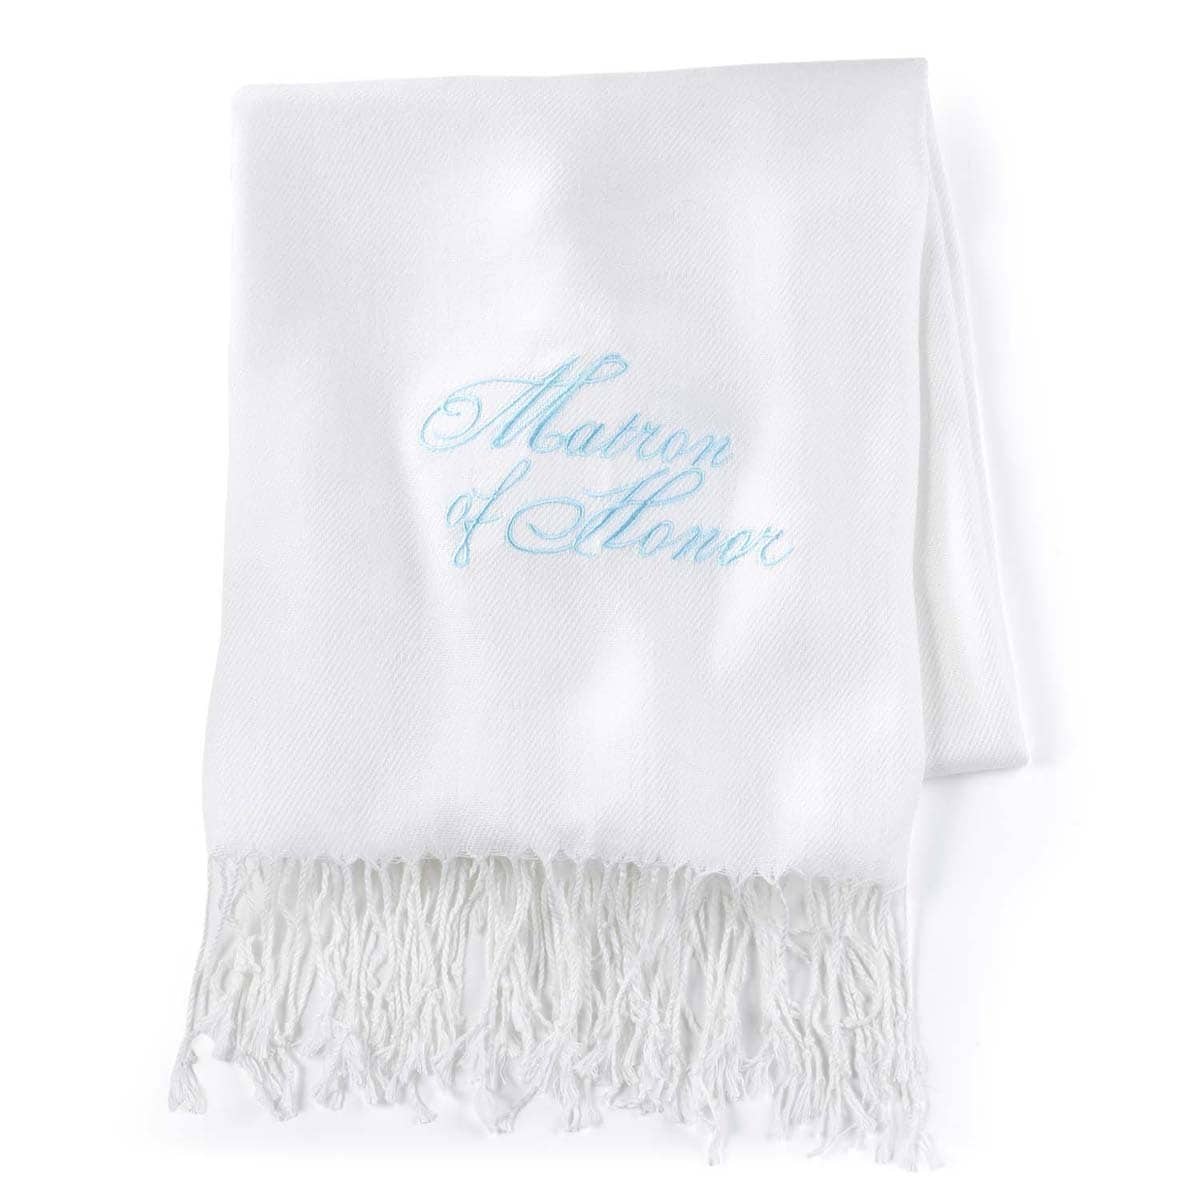 Hortense B. Hewitt Matron Of Honor Aqua Pashmina (White with aqua wordingDimensions 72 inches long x 28 inches wideMeasurements are approximate. )